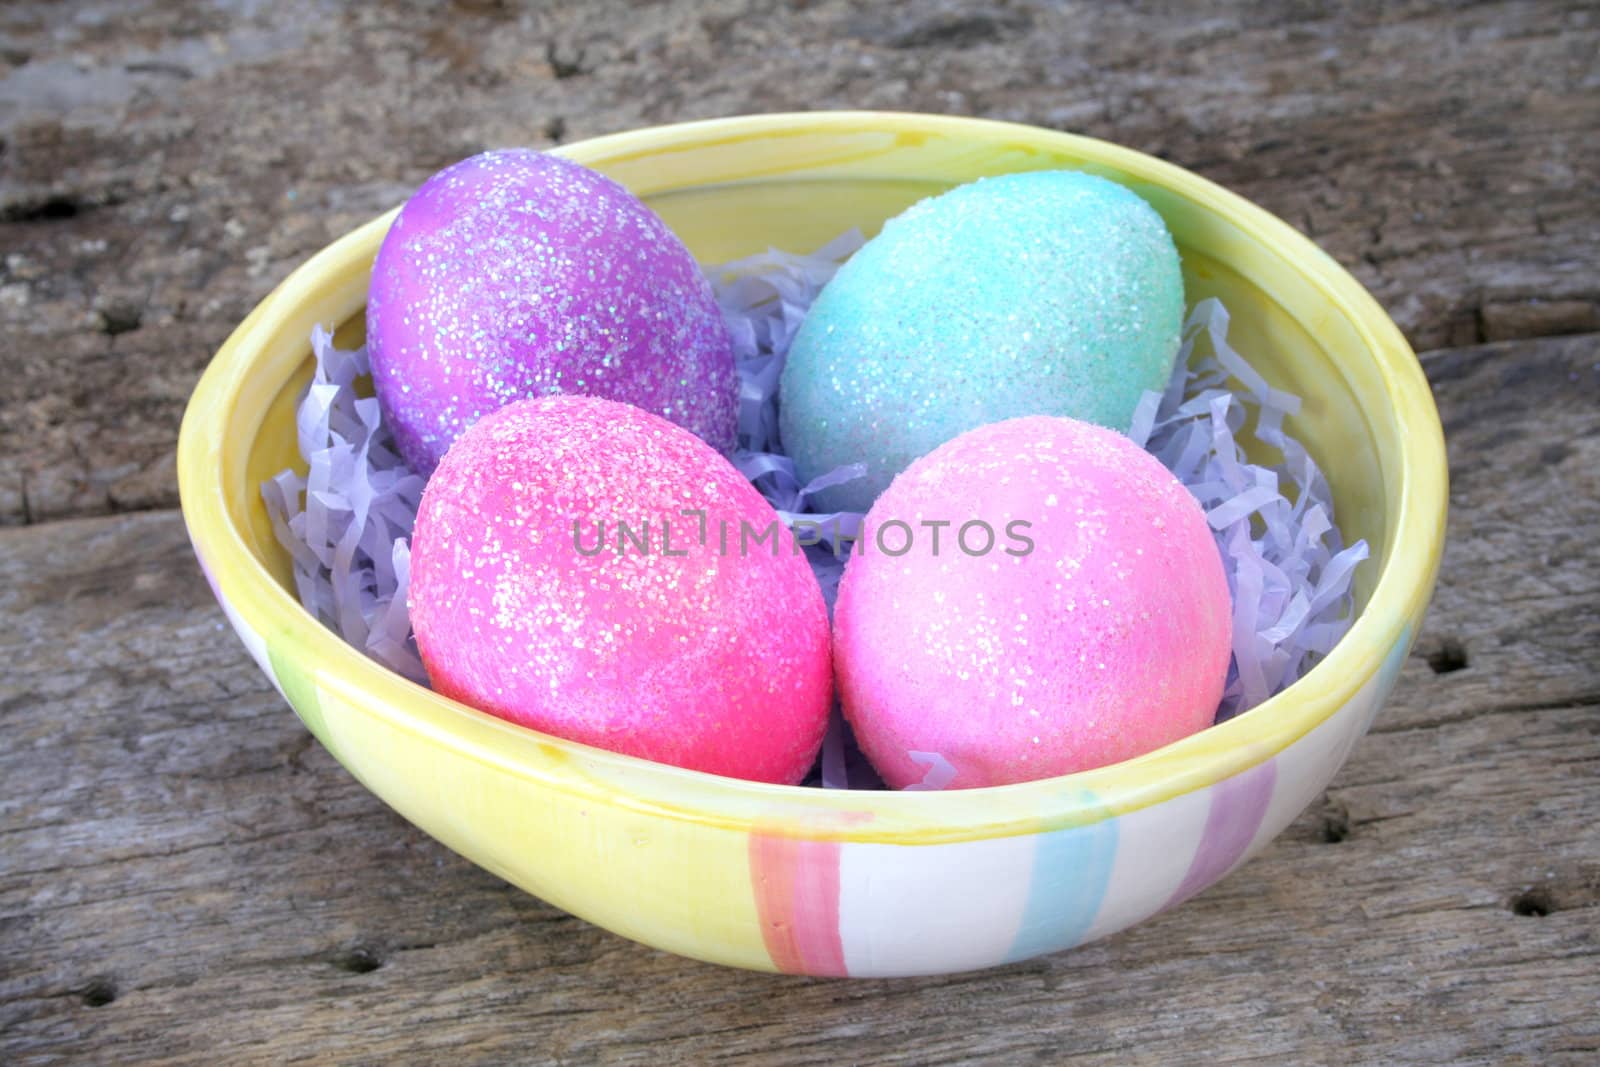 Egg shaped dish holding colorful Easter eggs.